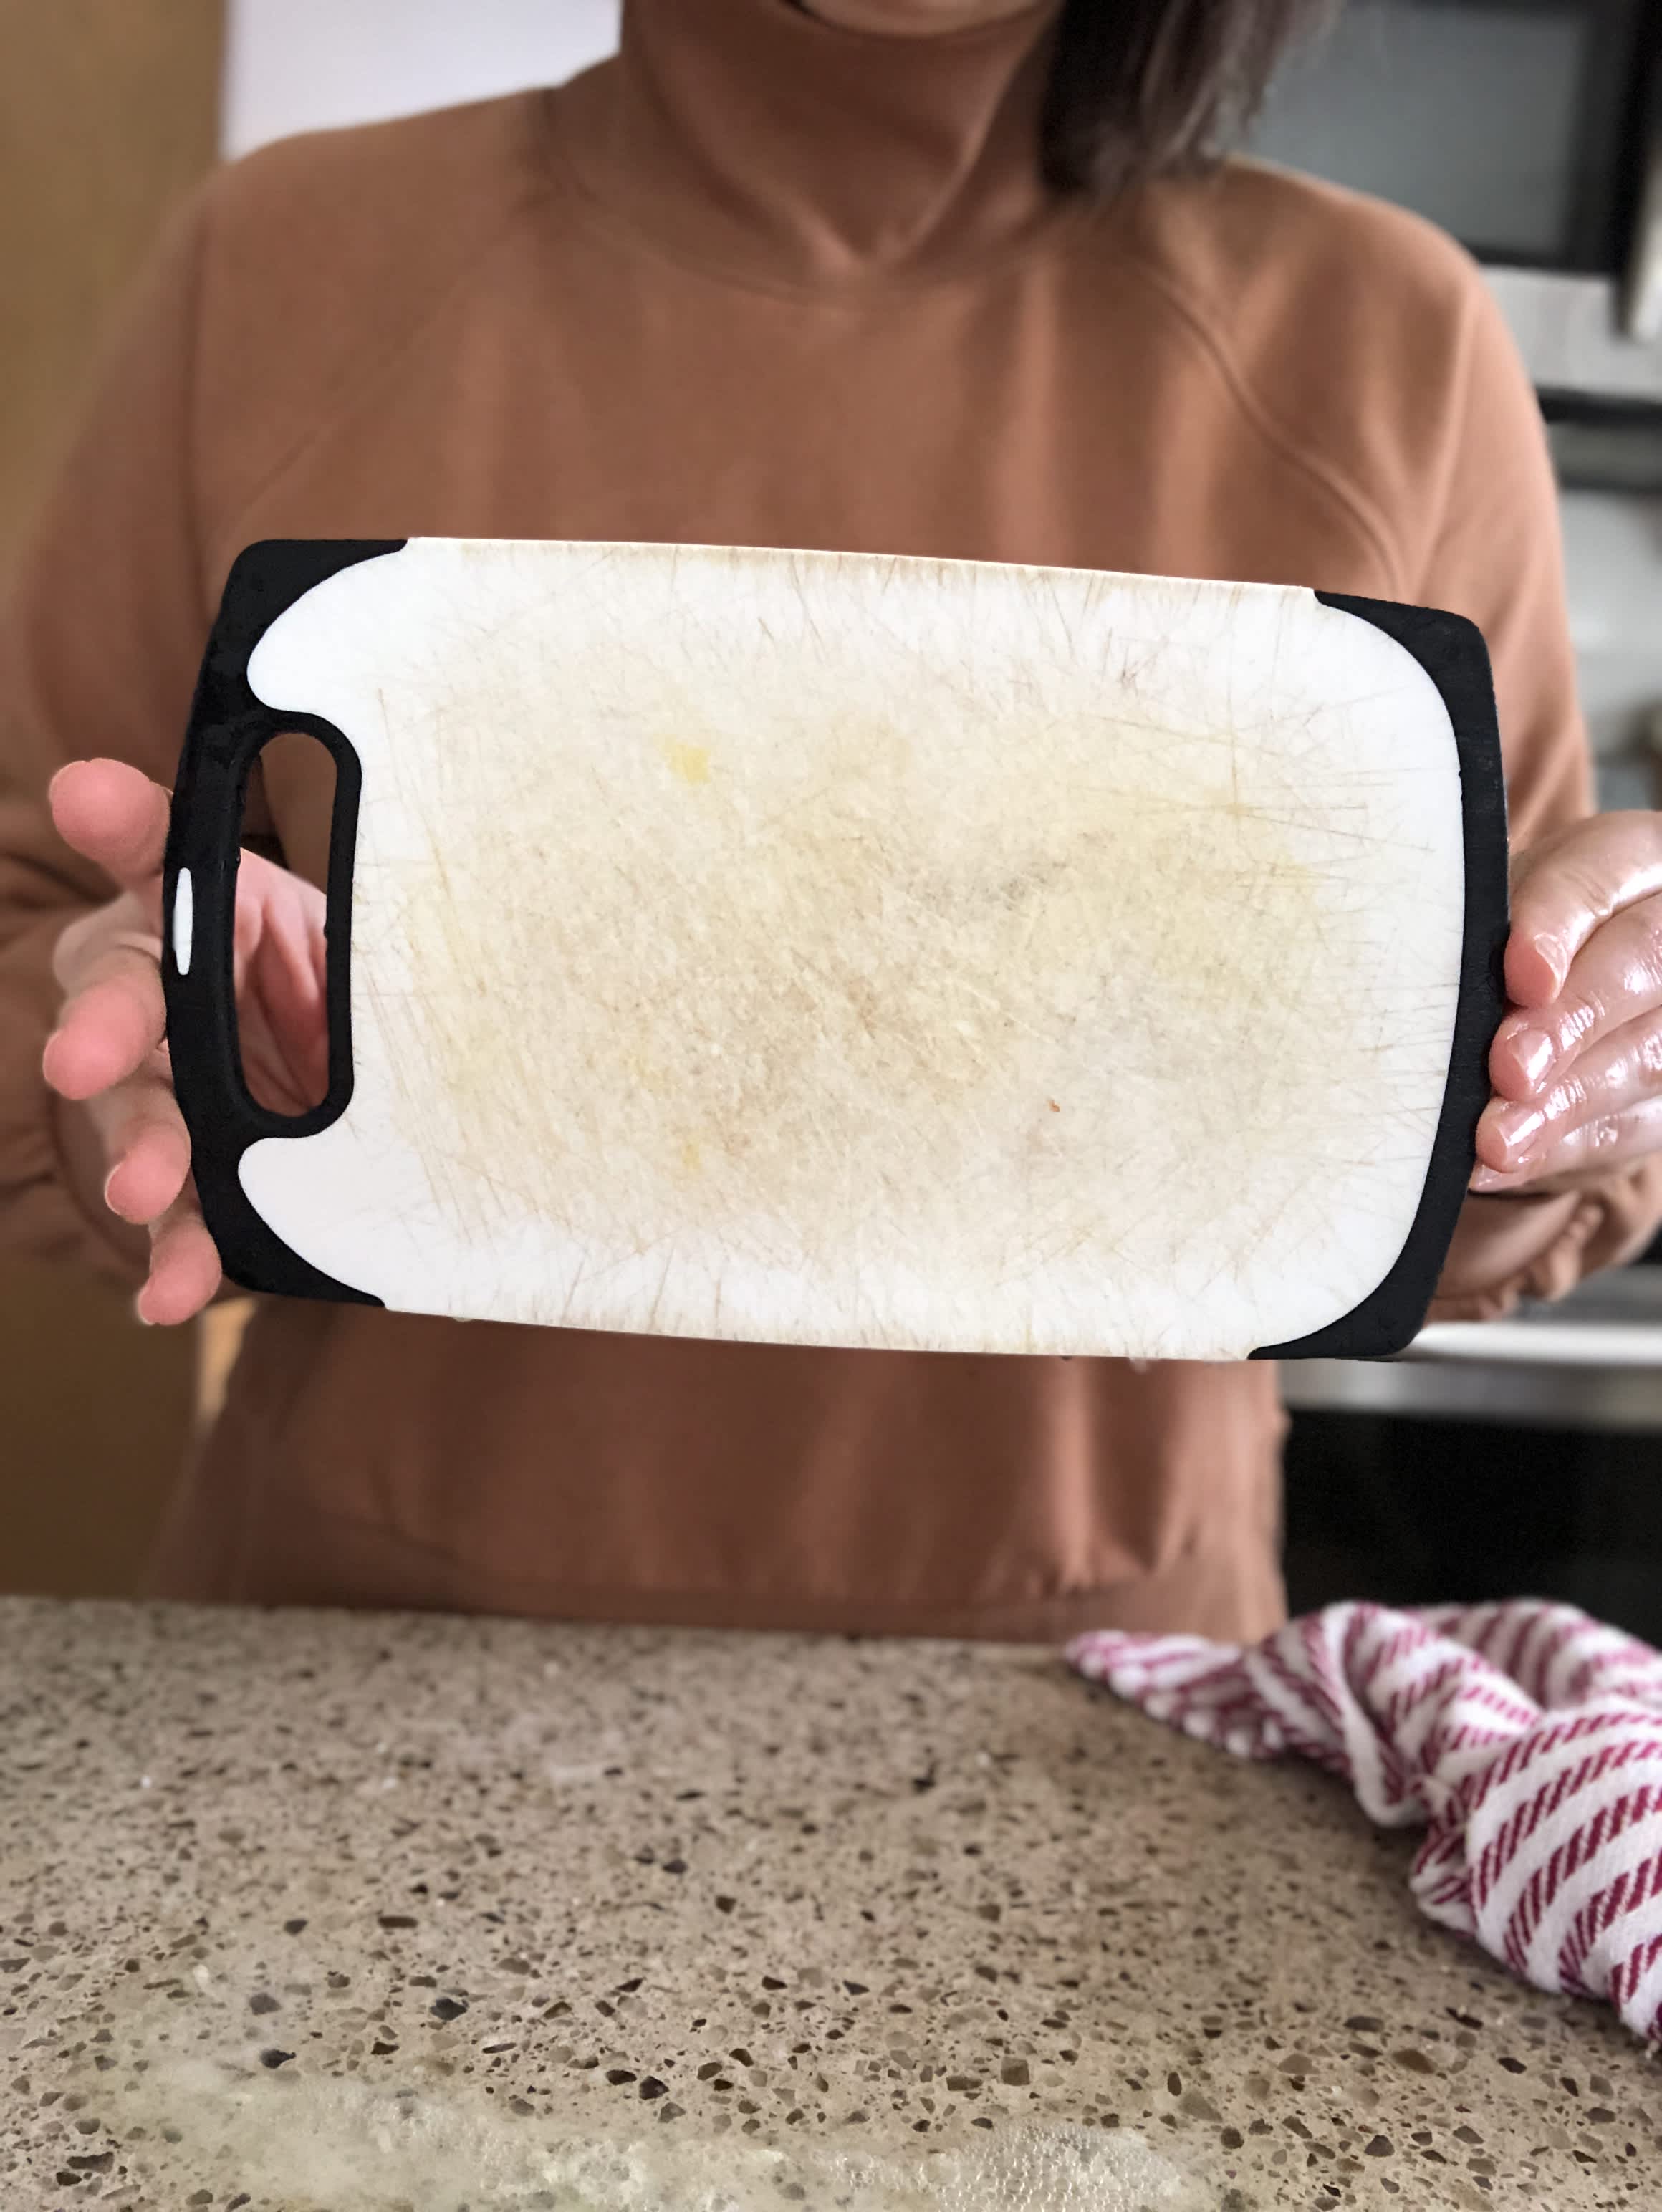 You Can Turn a Cutting Board Into a Table With This TikTok Hack